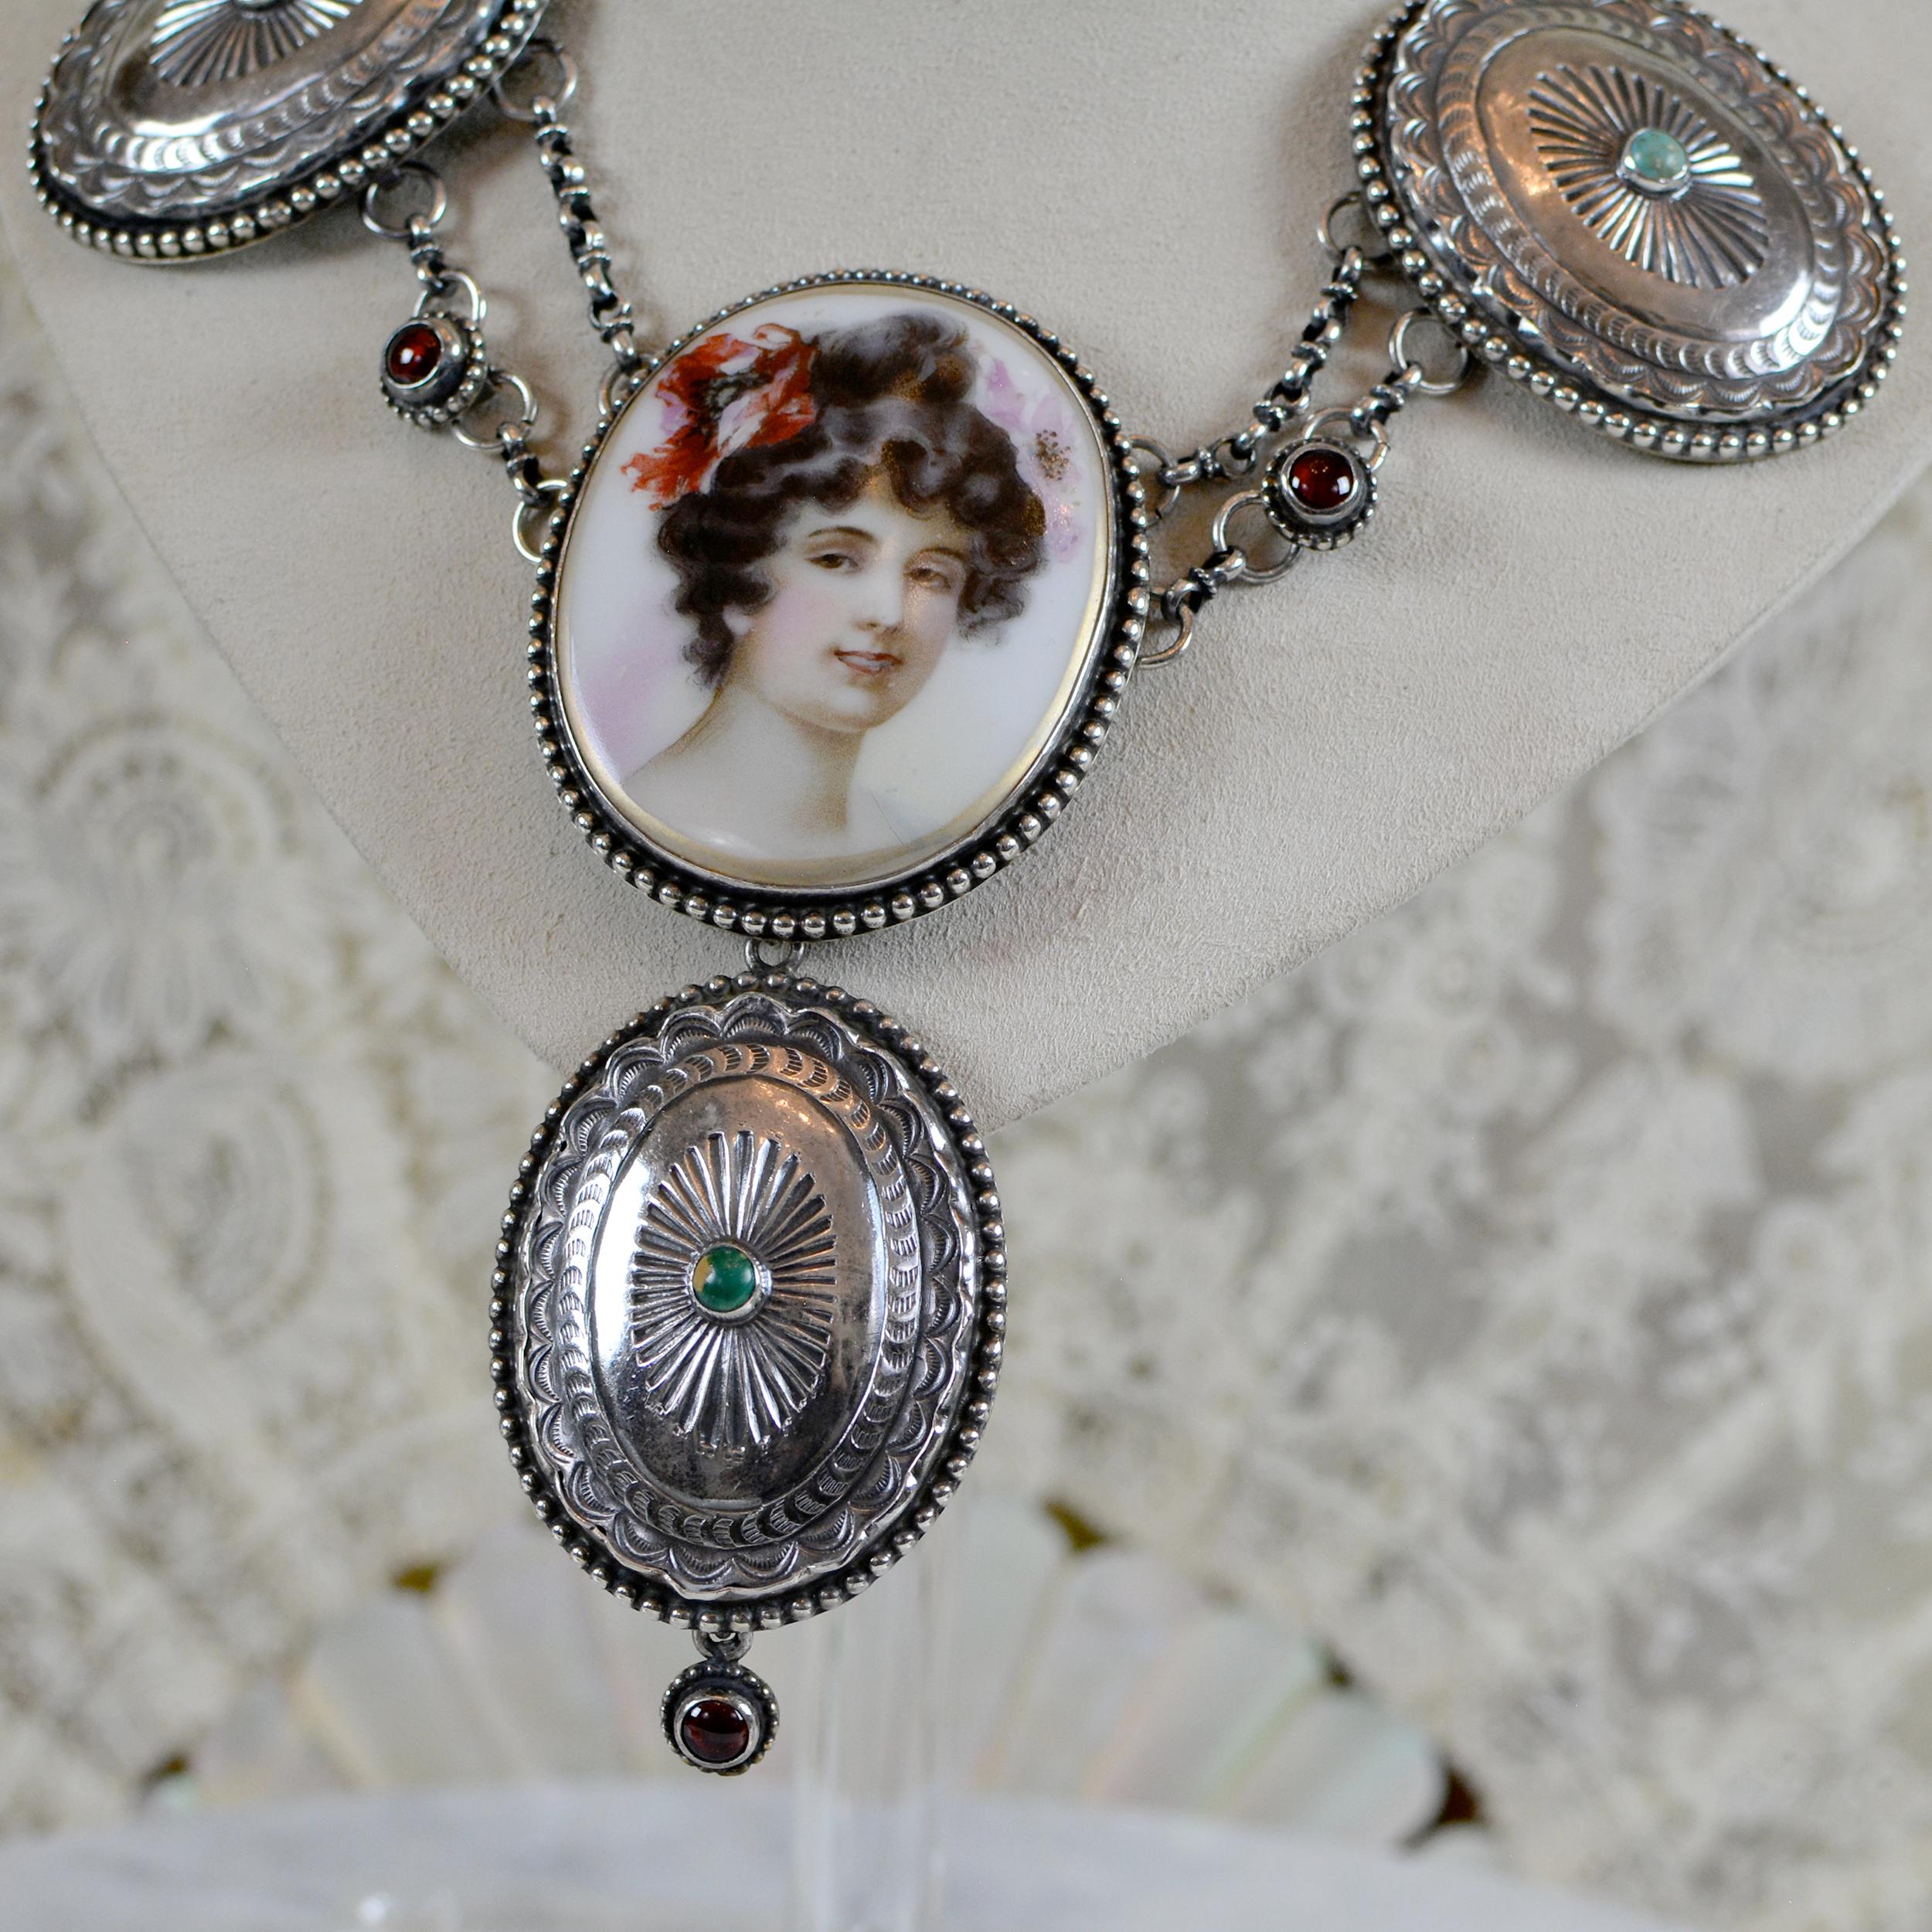 Jill Garber Goddess Portrait Festoon Necklace with Navajo Concho's and Garnets For Sale 2